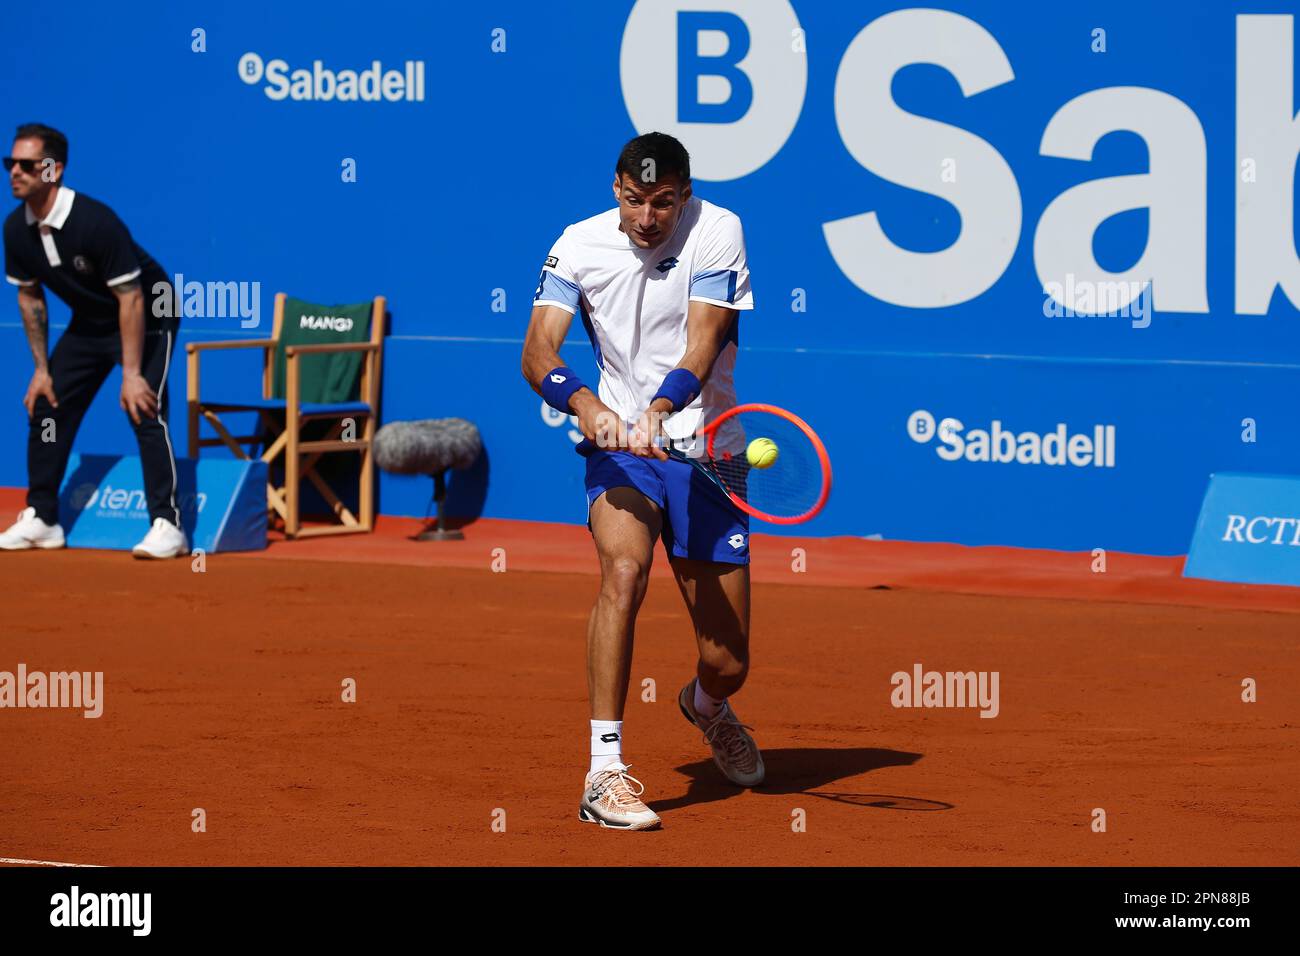 Barcelona, Spain. 17th Apr, 2023. Bernabe Zapata Miralles (ESP), APRIL17,  2023 - Tennis : Bernabe Zapata Miralles during singles 1st round match  against Attila Balazs on the Barcelona Open Banc Sabadell tennis